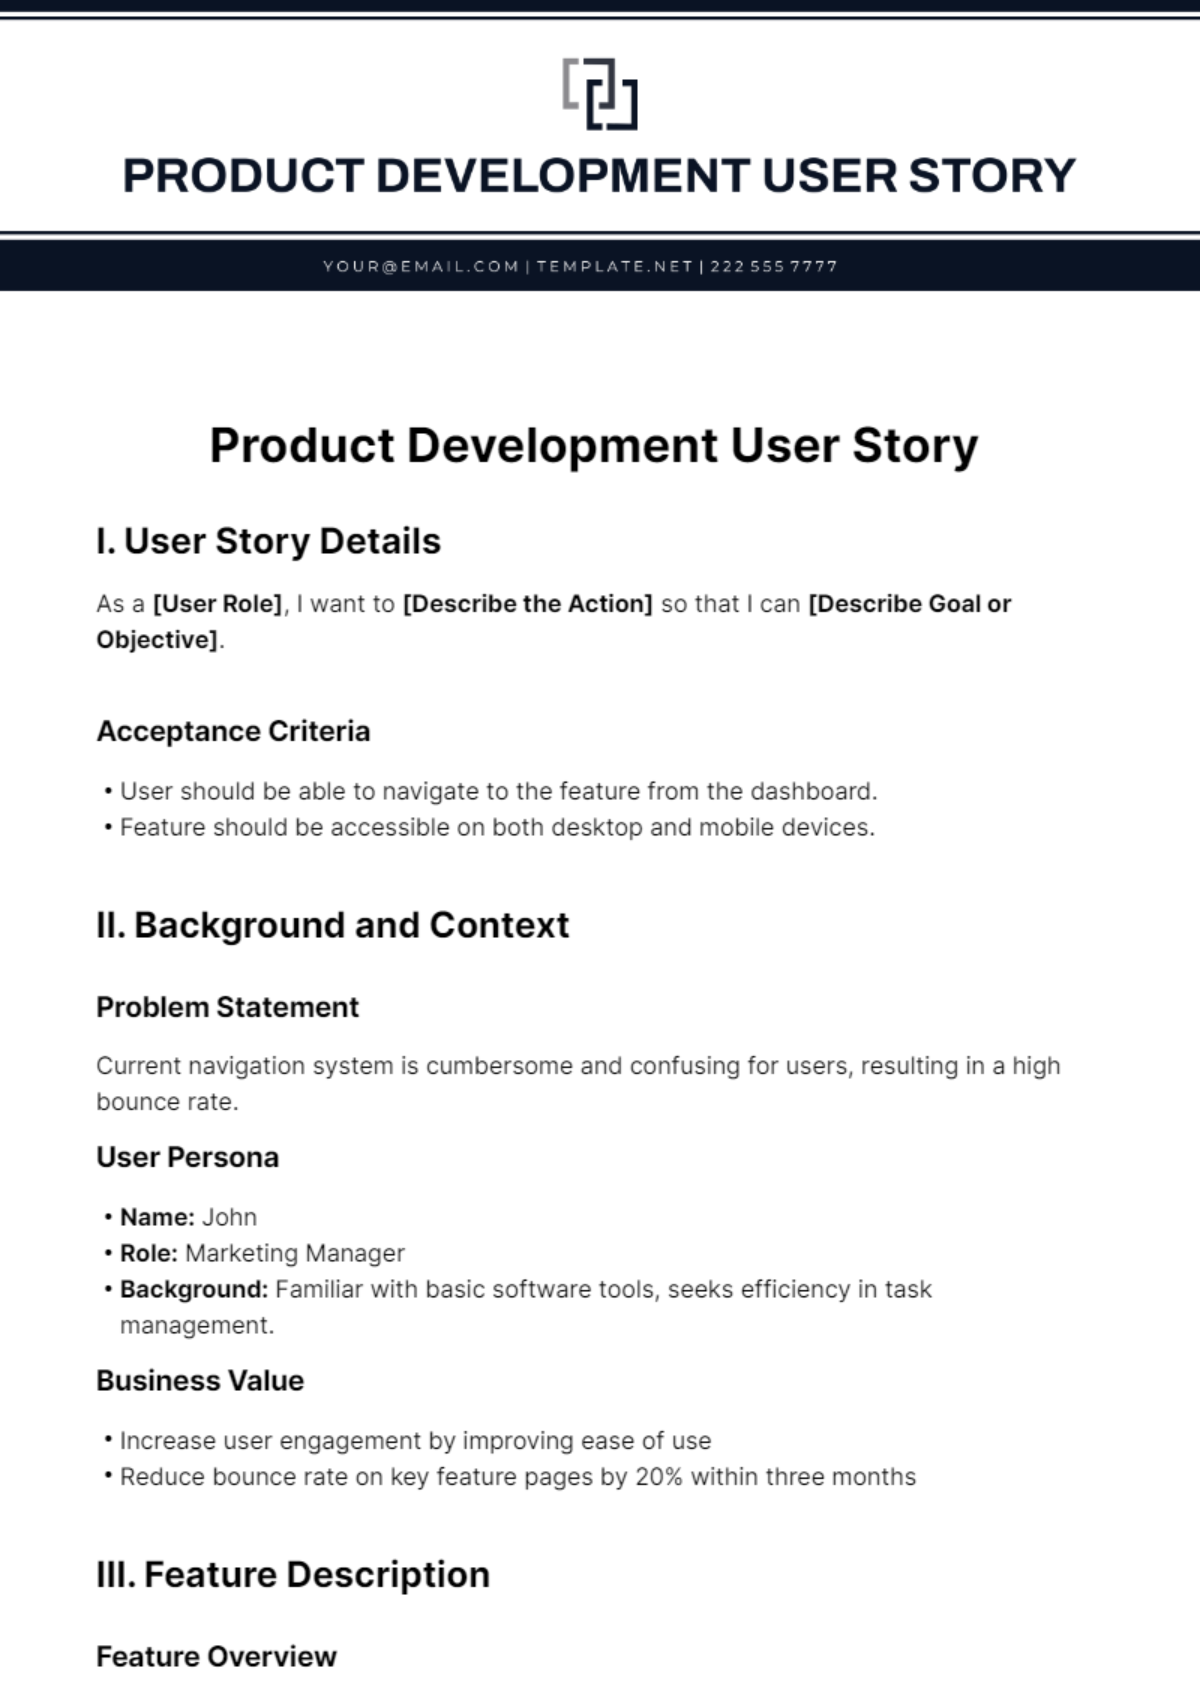 Product Development User Story Template